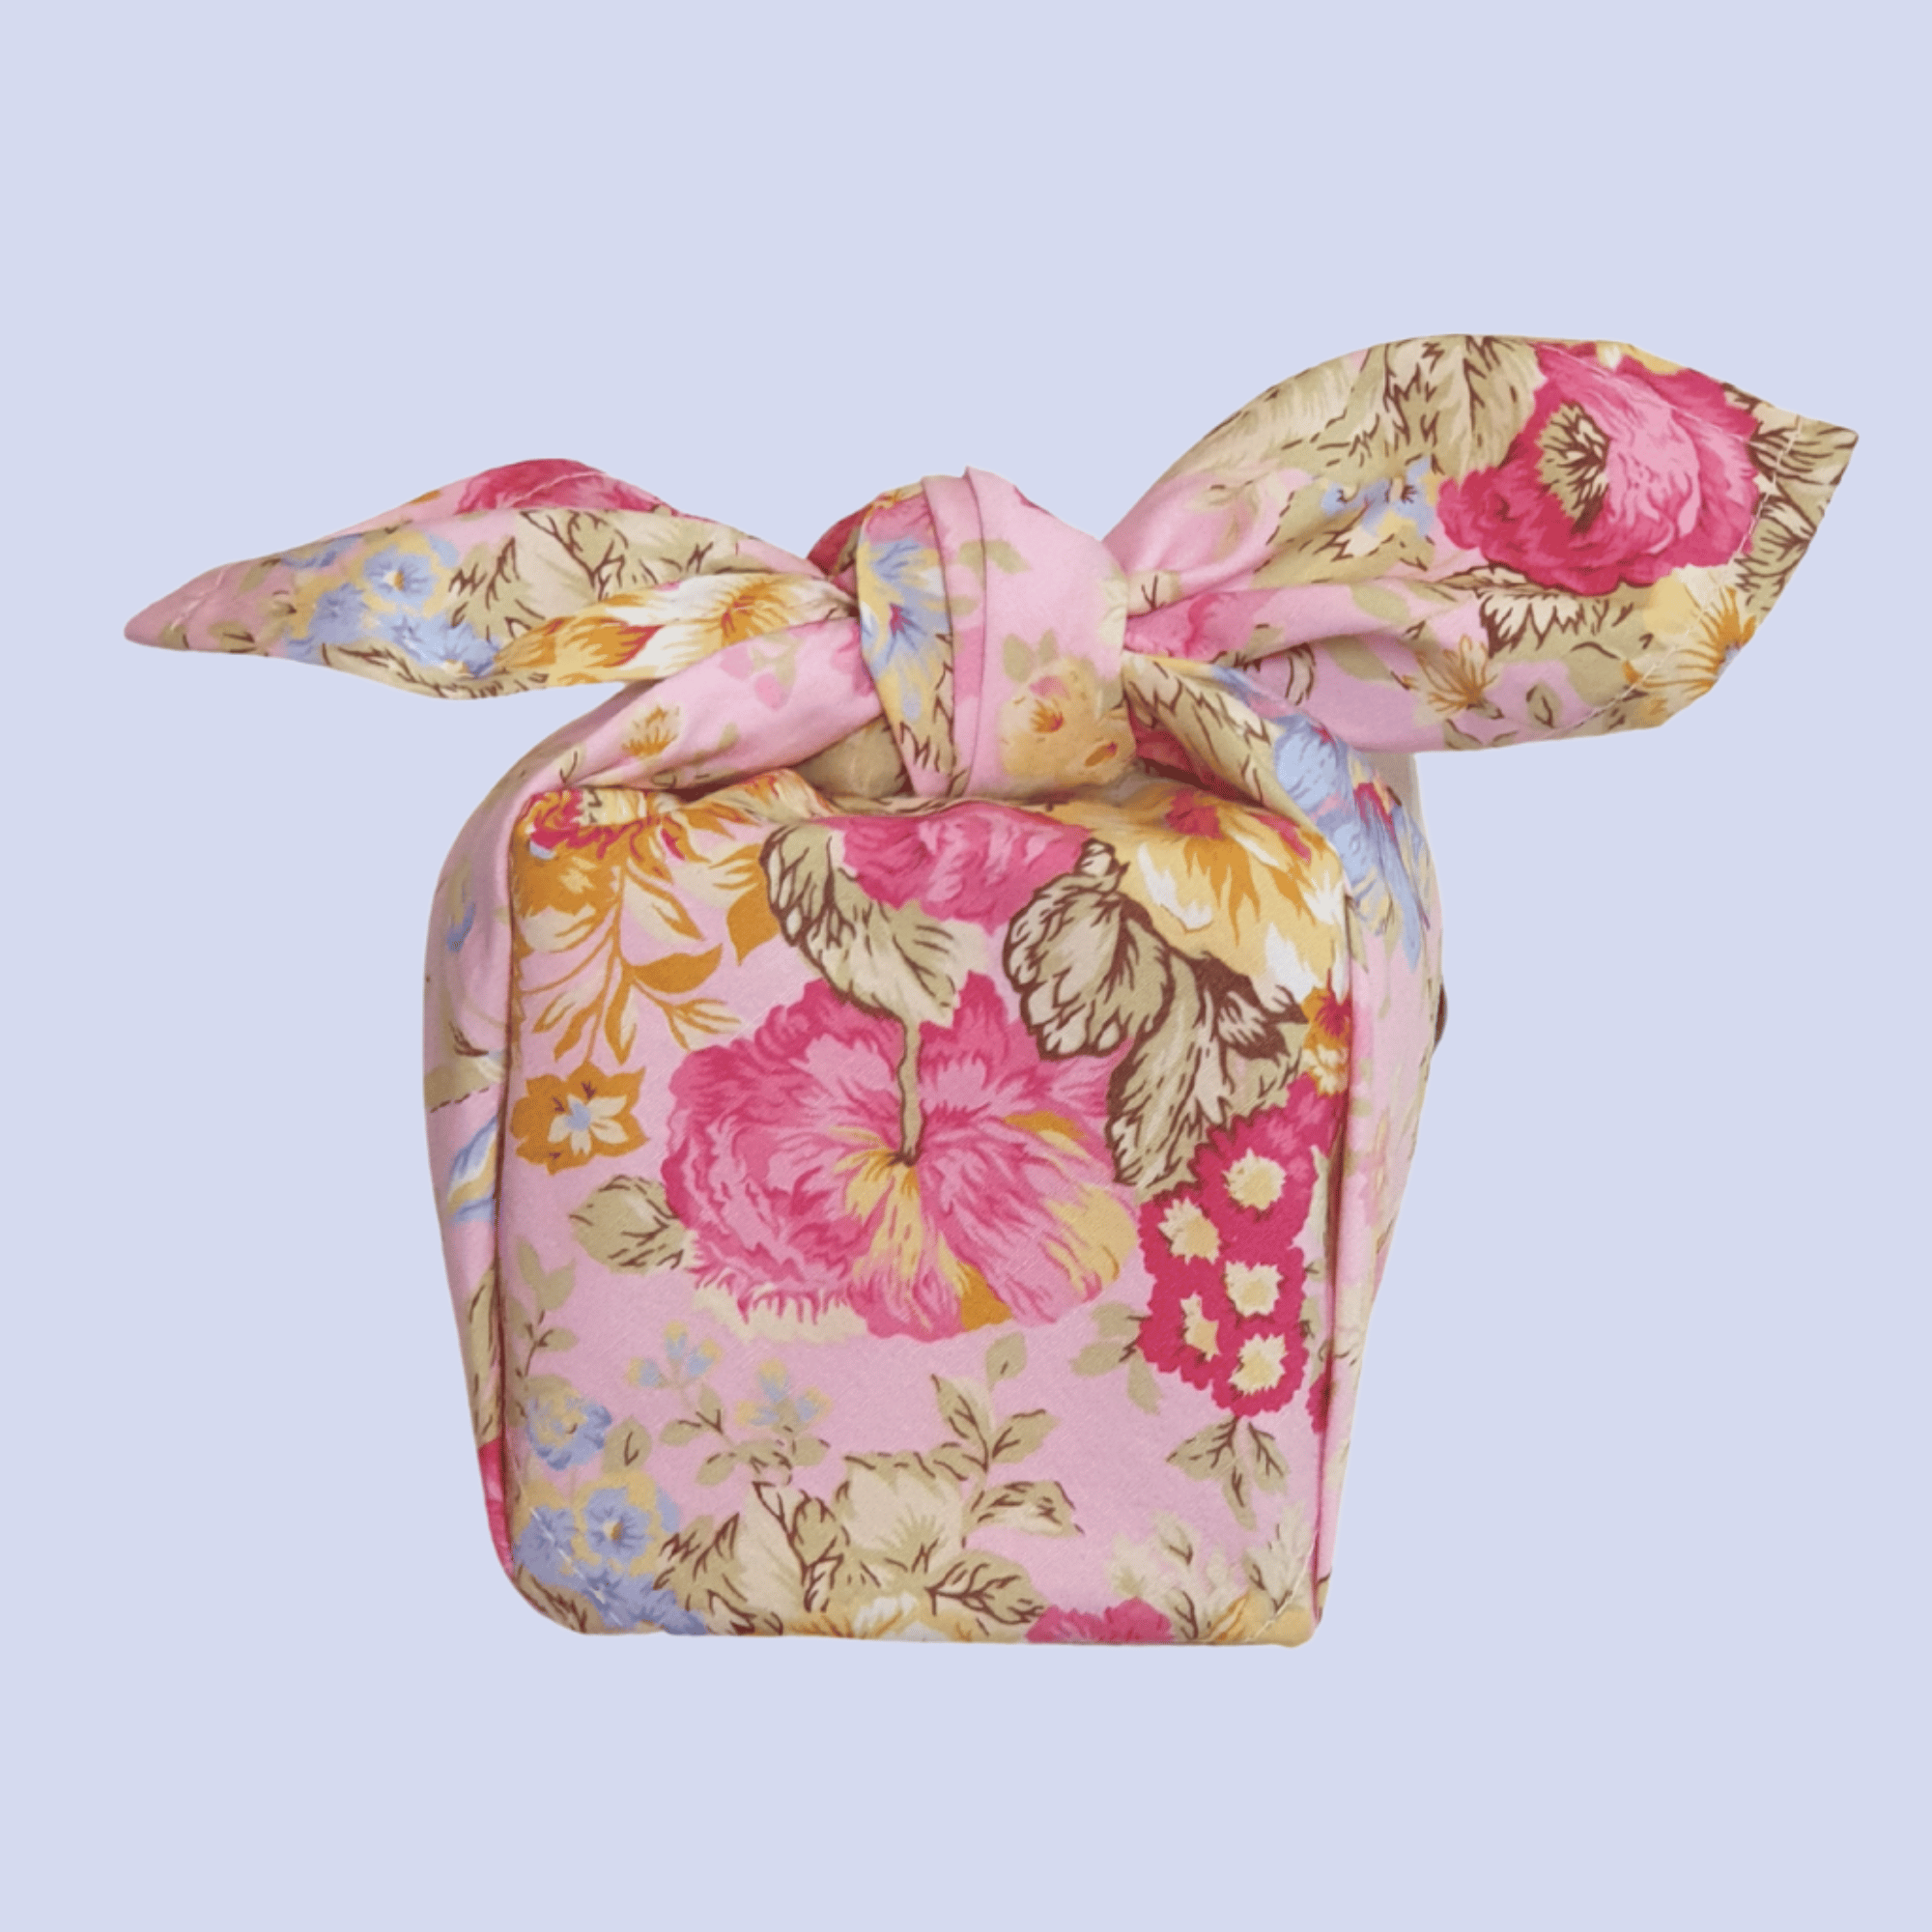 Sustainable and pretty Furoshiki cloth wrapping for gift wrapping. Made in Australia from 100% cotton cloth.